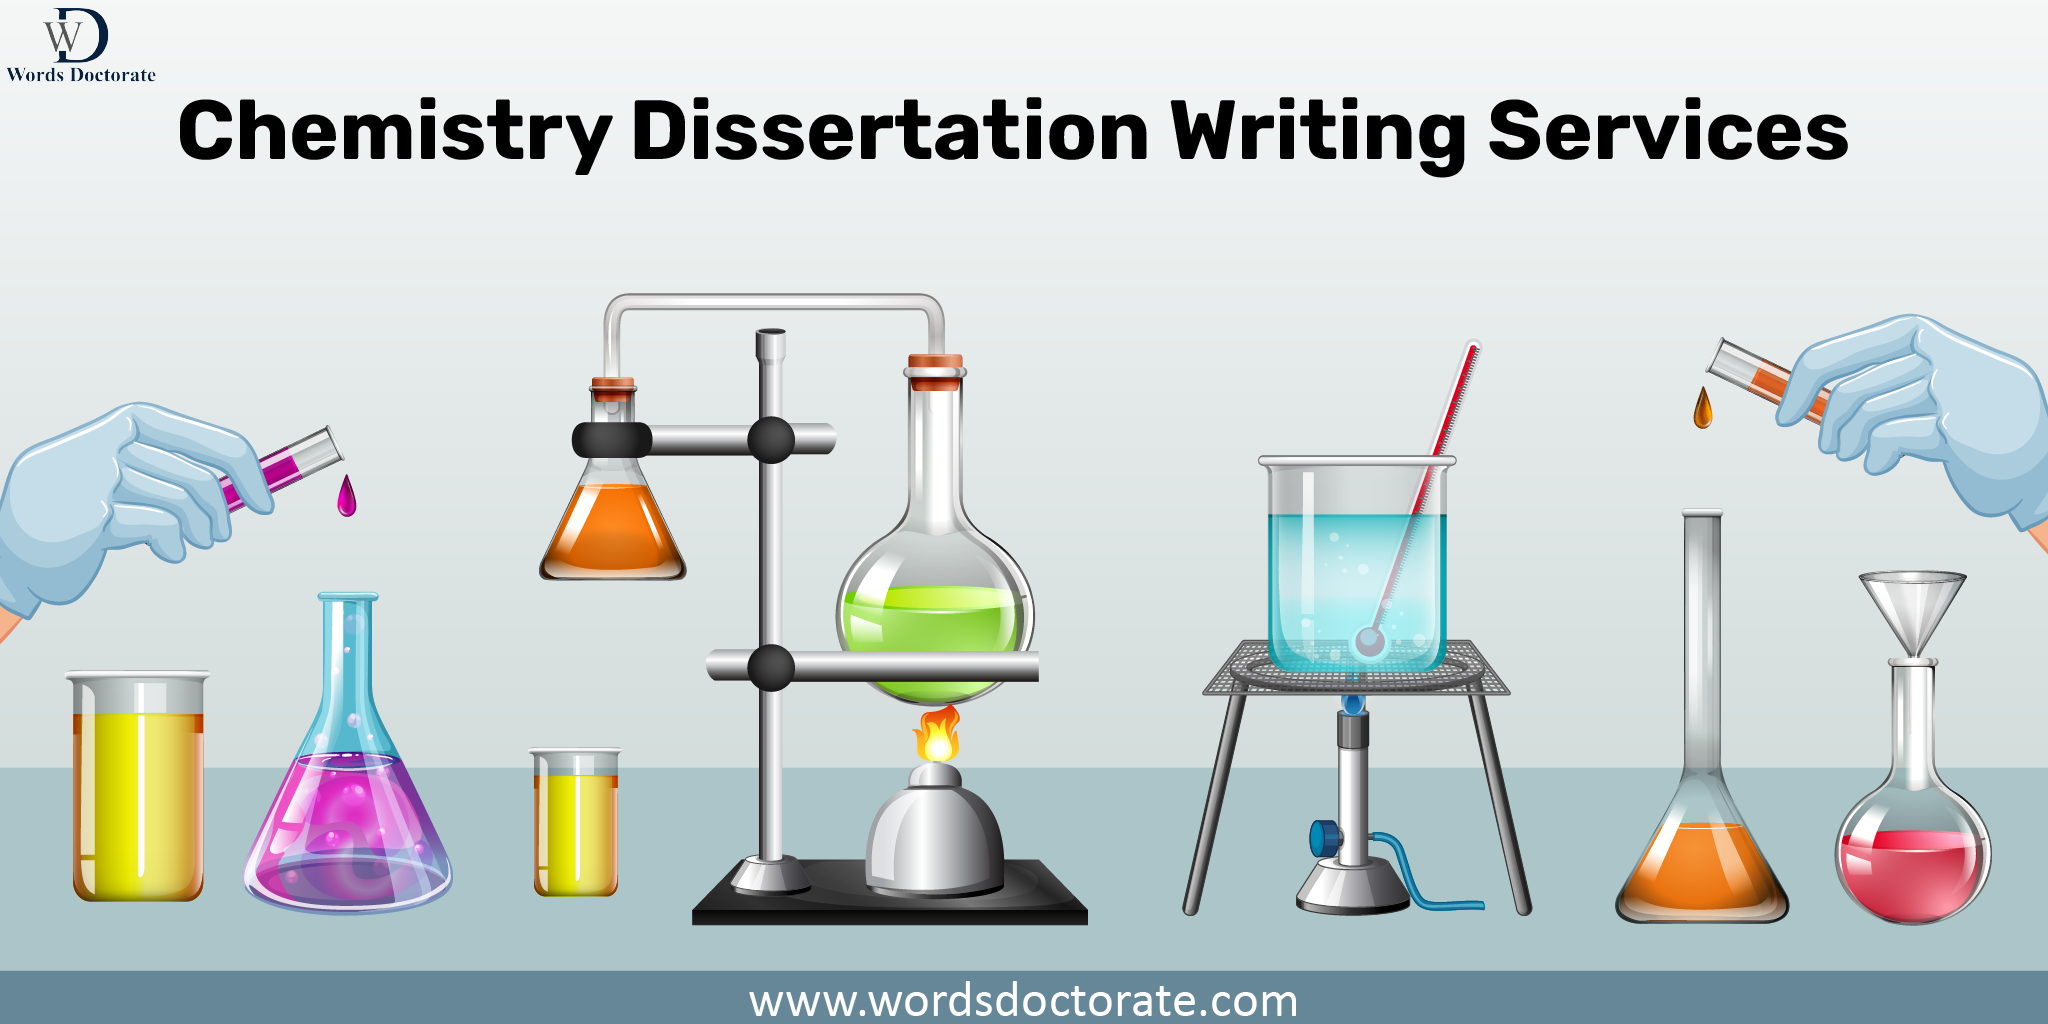 Chemistry Dissertation Writing Services